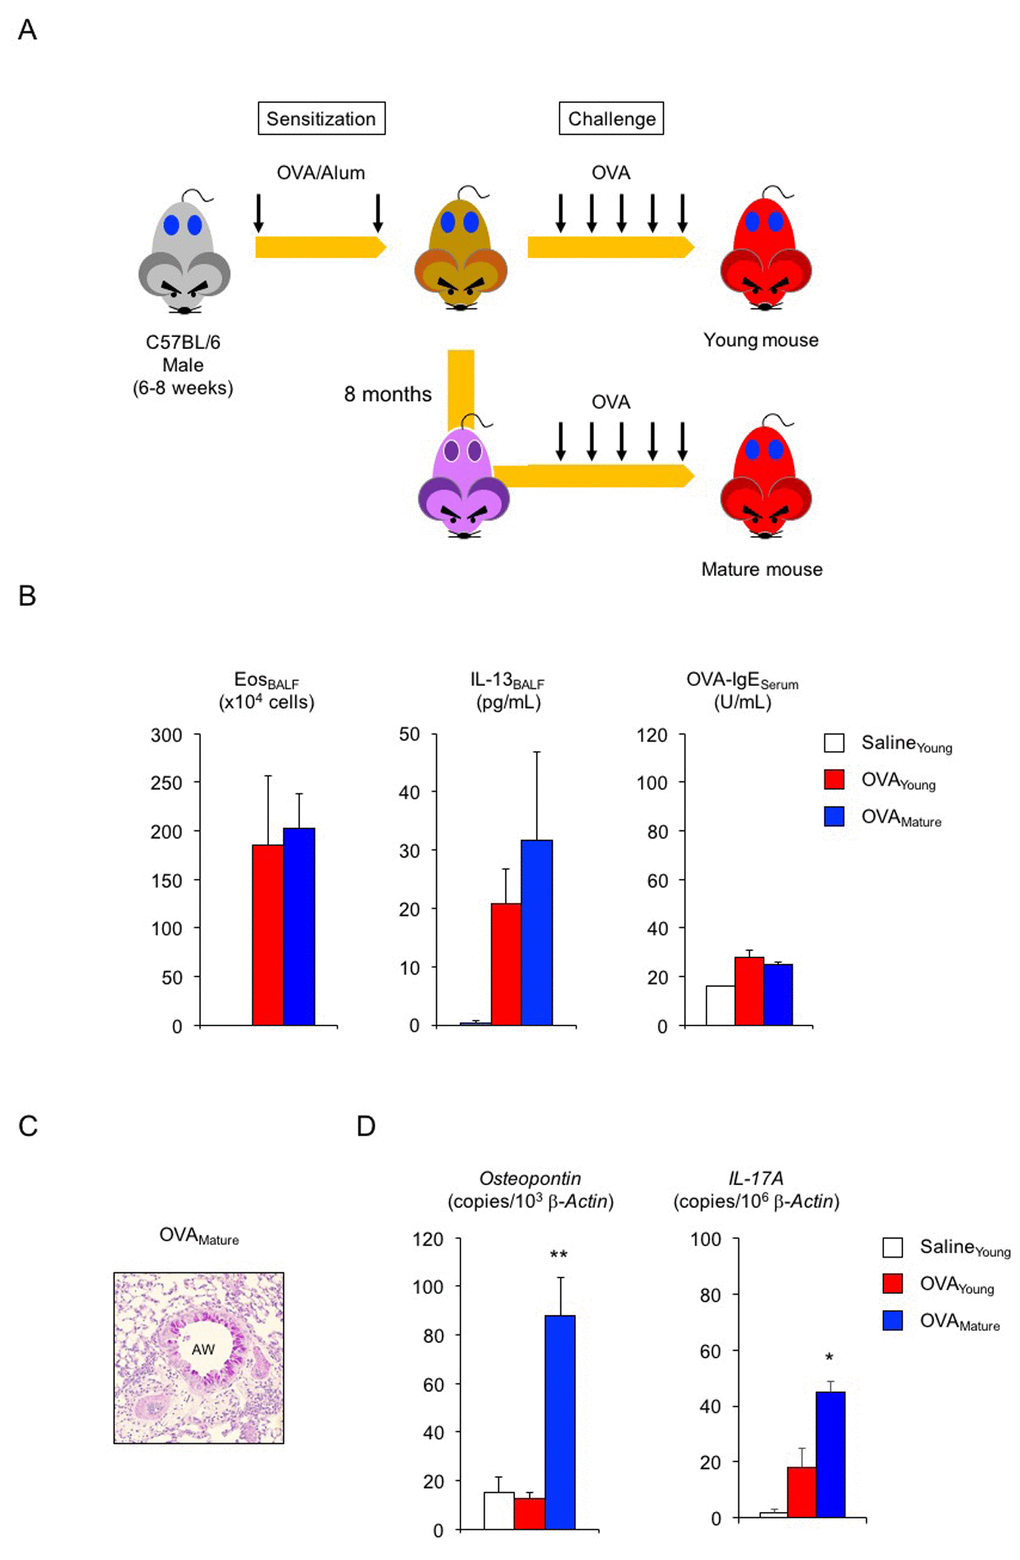 Enhanced transcription of osteopontin and IL-17A in lungs of asthmatic mature male mice. (A) Schematic representation of experimental design for asthma induction in mature male mice. Sensitized young adult male mice were challenged with ovalbumin (OVA) at 10 months of age. (B) Changes in Th2-cell-driven allergic responses in asthmatic mature male mice. White box: control group (n = 3); colored boxes: asthma groups (n = 5 - 7). (C) Representative images of PAS staining of lungs from asthmatic mature male mice. AW: airway. (D) Enhanced transcription of osteopontin and IL-17A in lungs of asthmatic mature male mice. White box: control group (n = 3); colored boxes: asthma groups (n = 5–7). Data are presented as means ± SEM. **P P 